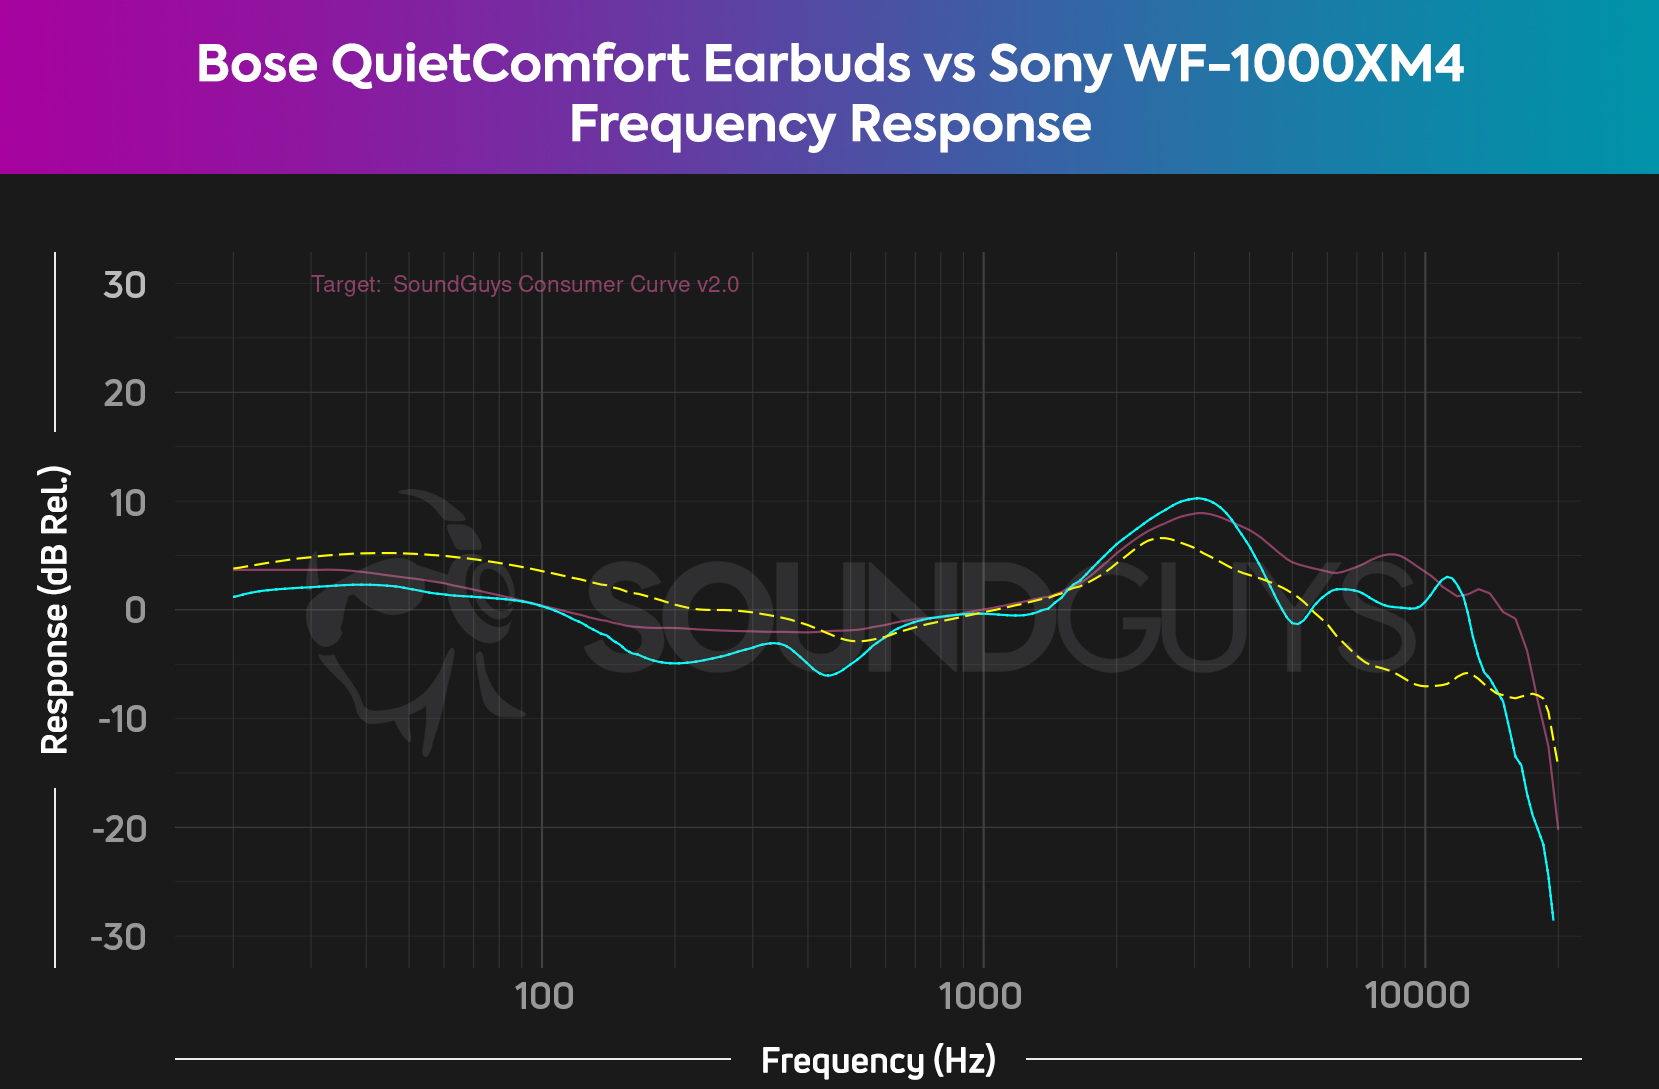 A chart compares the Bose QuietComfort Earbuds (cyan) vs Sony WF-1000XM4 (yellow dash) frequency responses against the SoundGuys Consumer Curve V2 (pink), revealing Bose's more pleasant treble and bass response.